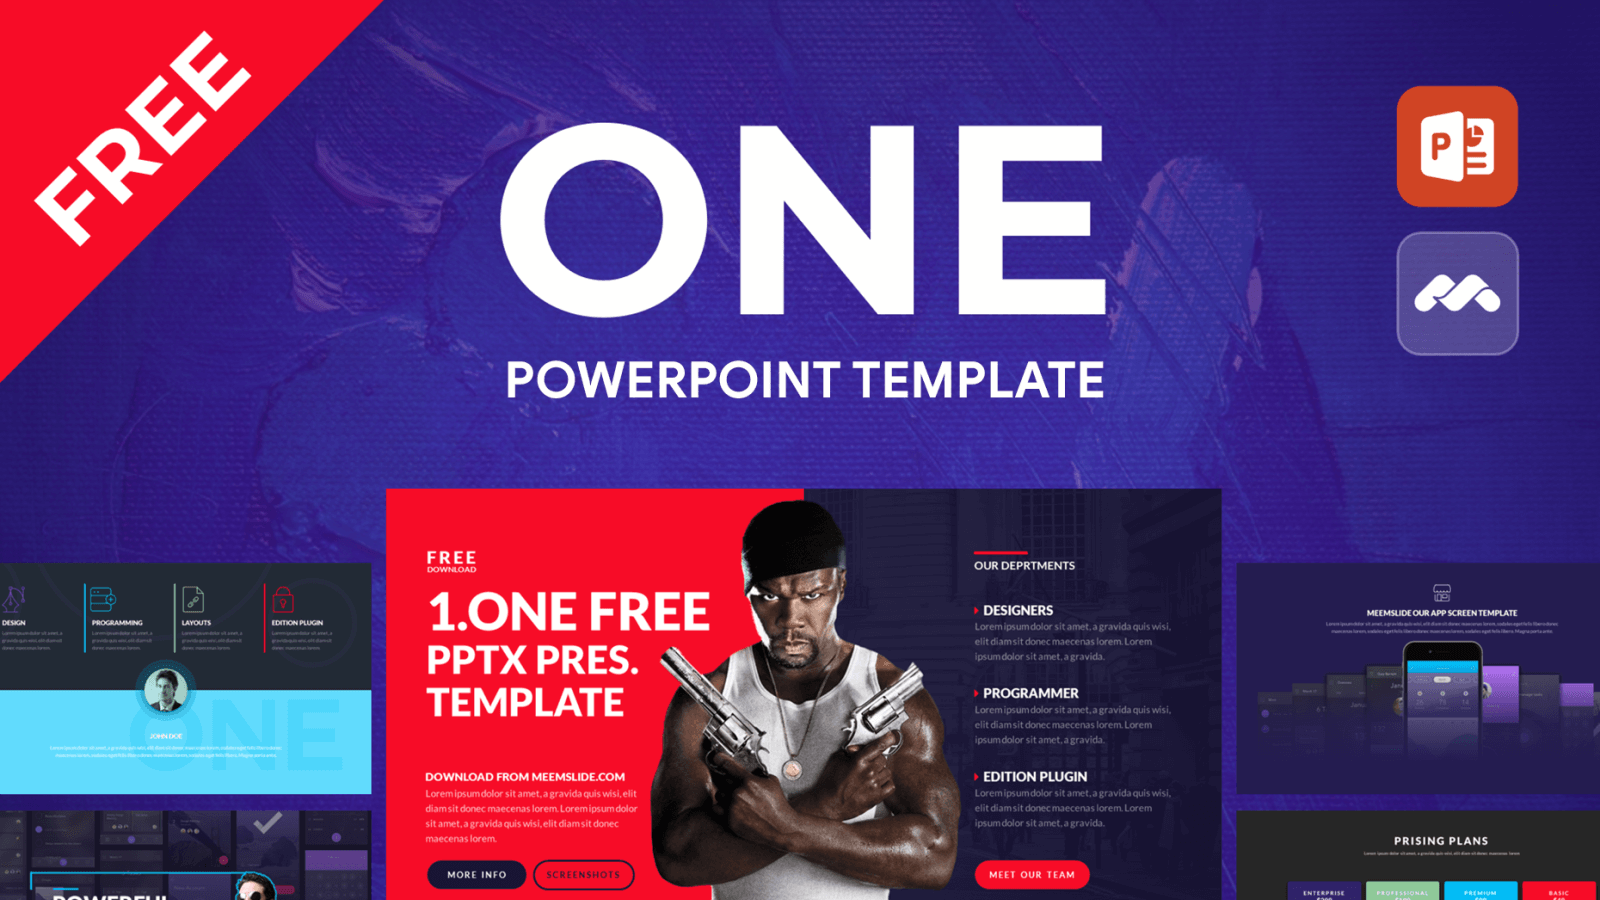 Free Tesla Powerpoint Template Just Free Slides